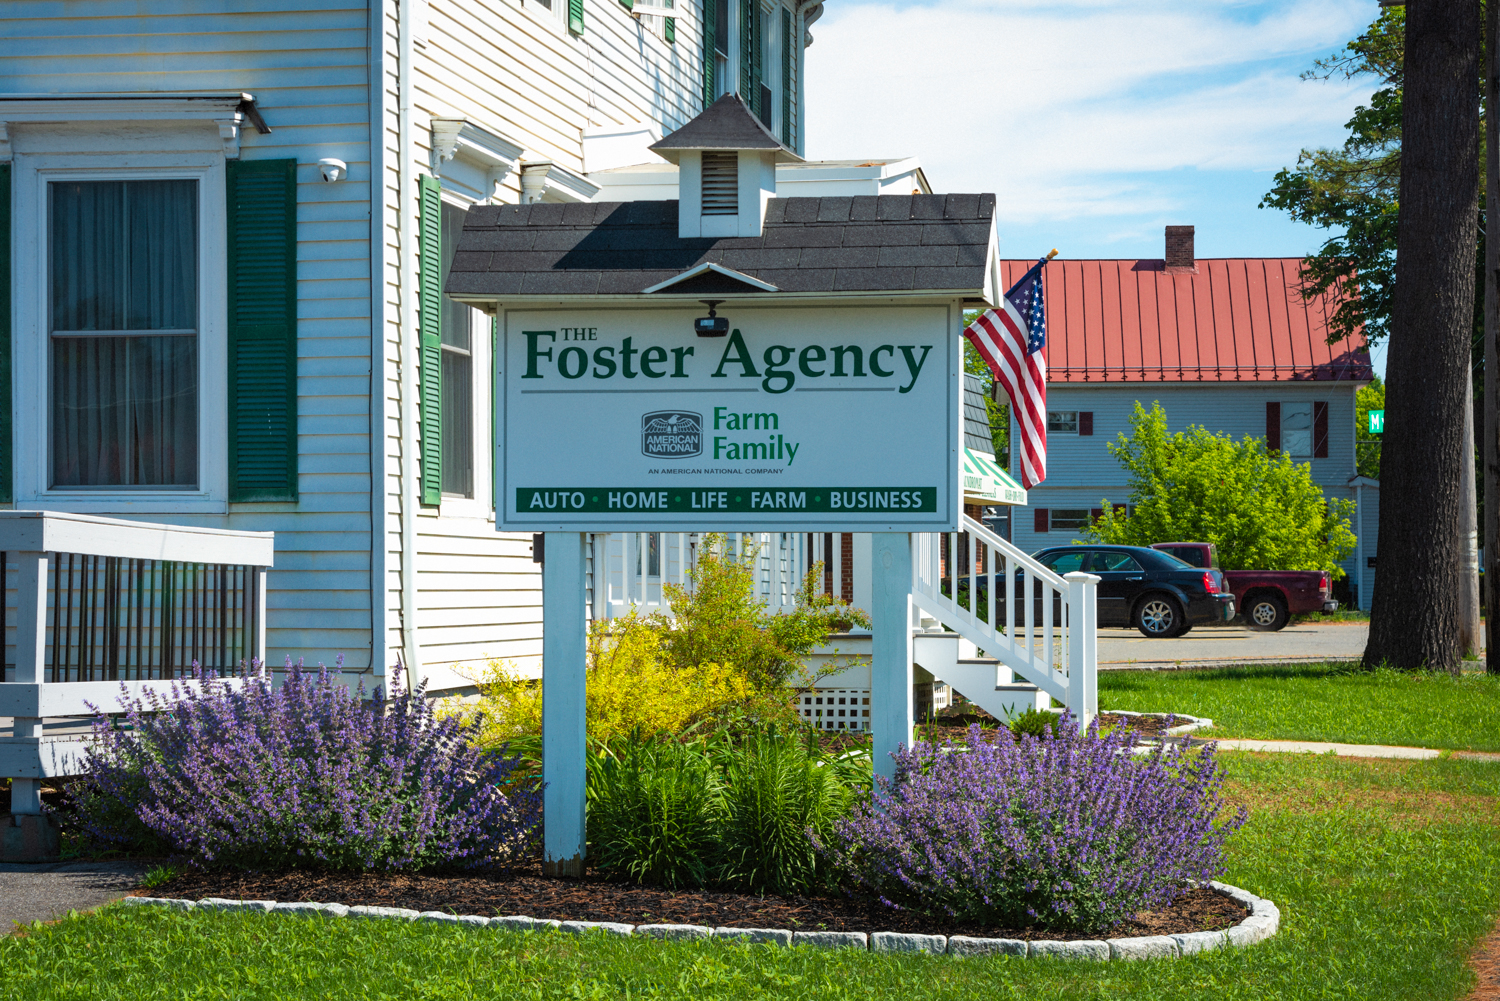 The Foster Agency